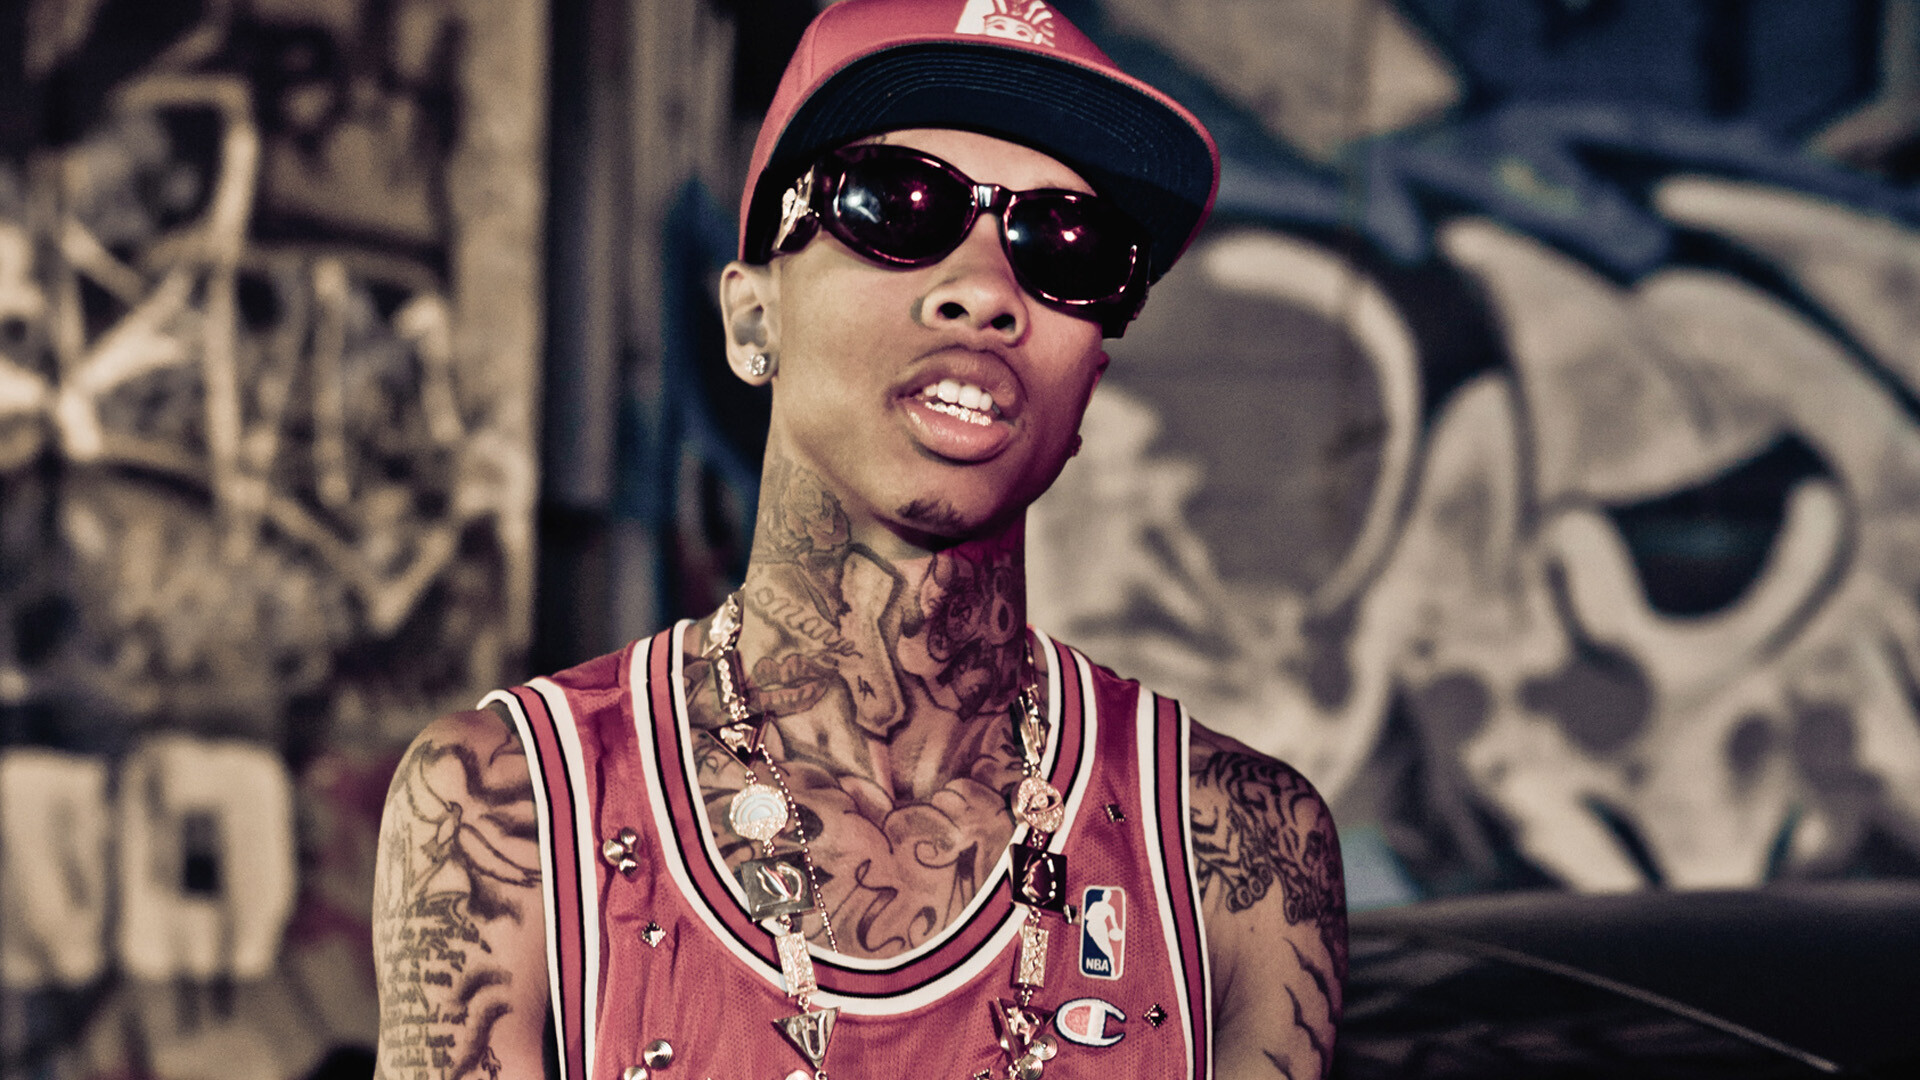 Tyga: "Do My Dance" was first released as the lead single from the rapper's mixtape, Well Done 3. 1920x1080 Full HD Wallpaper.